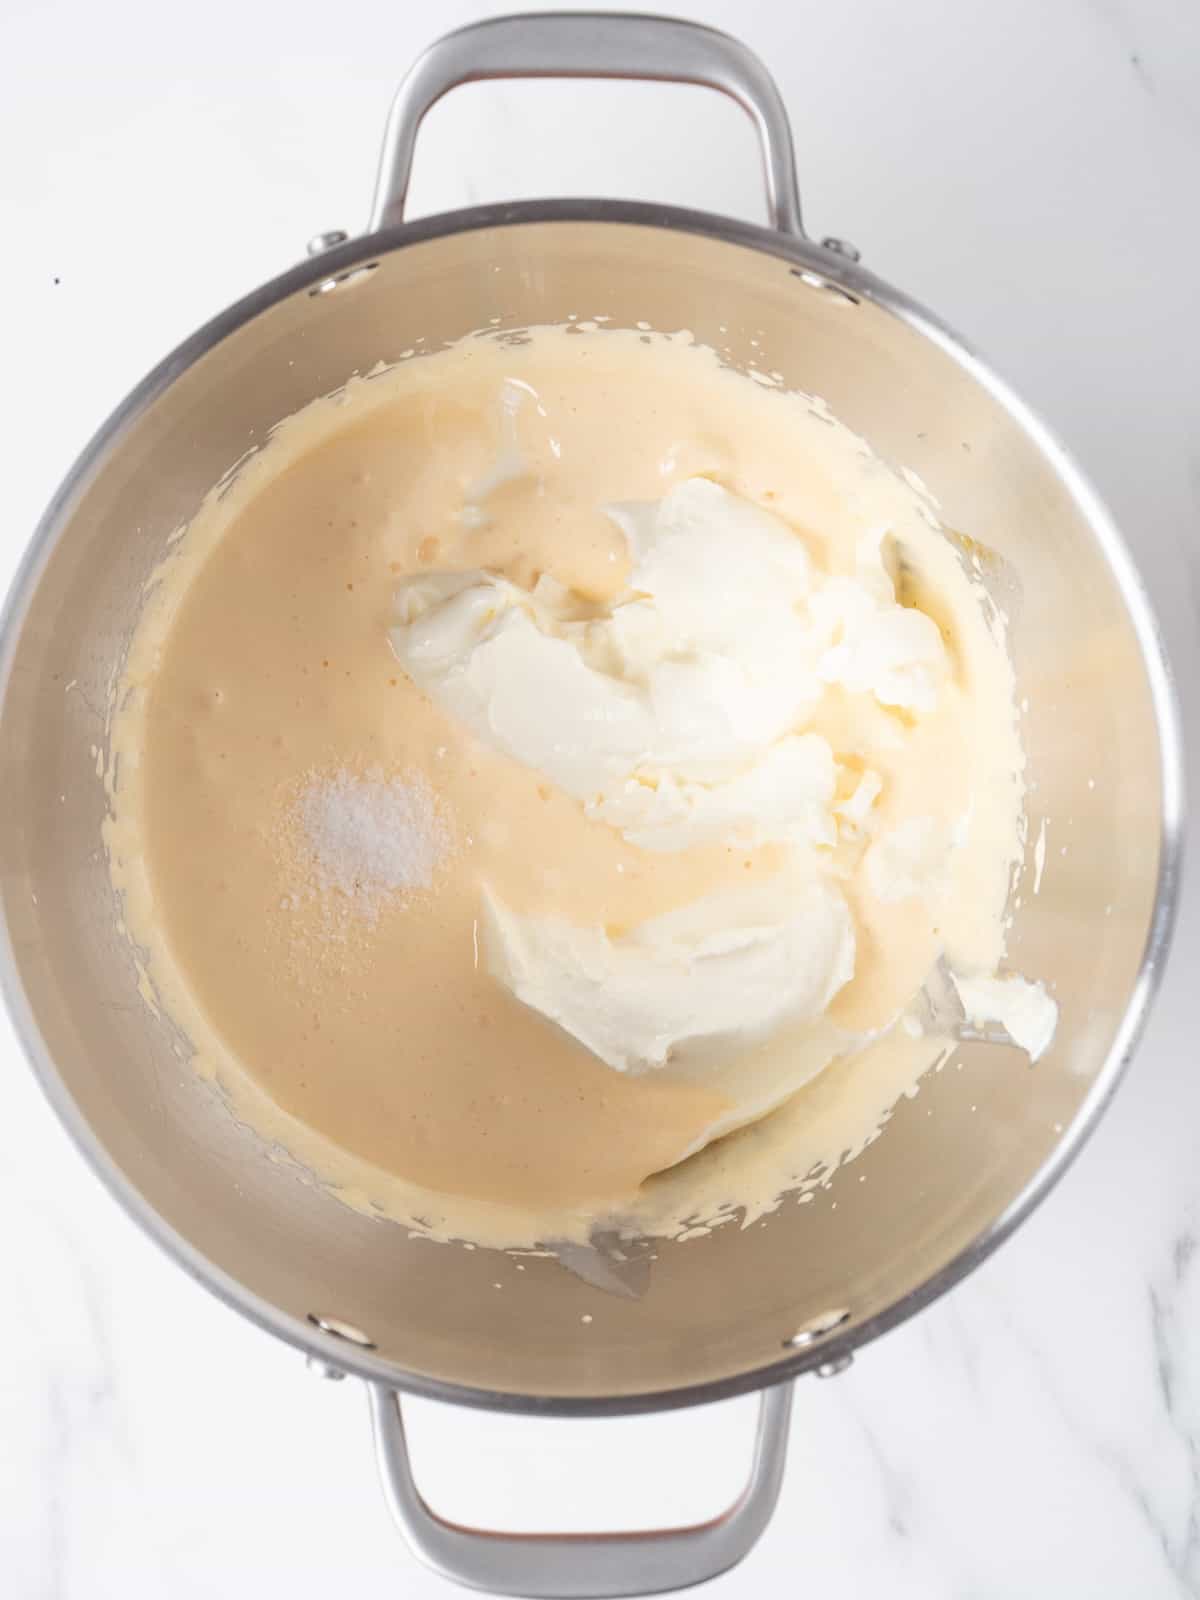 A stand mixer bowl with salt and mascarpone added to the egg yolk and sugar mixture.